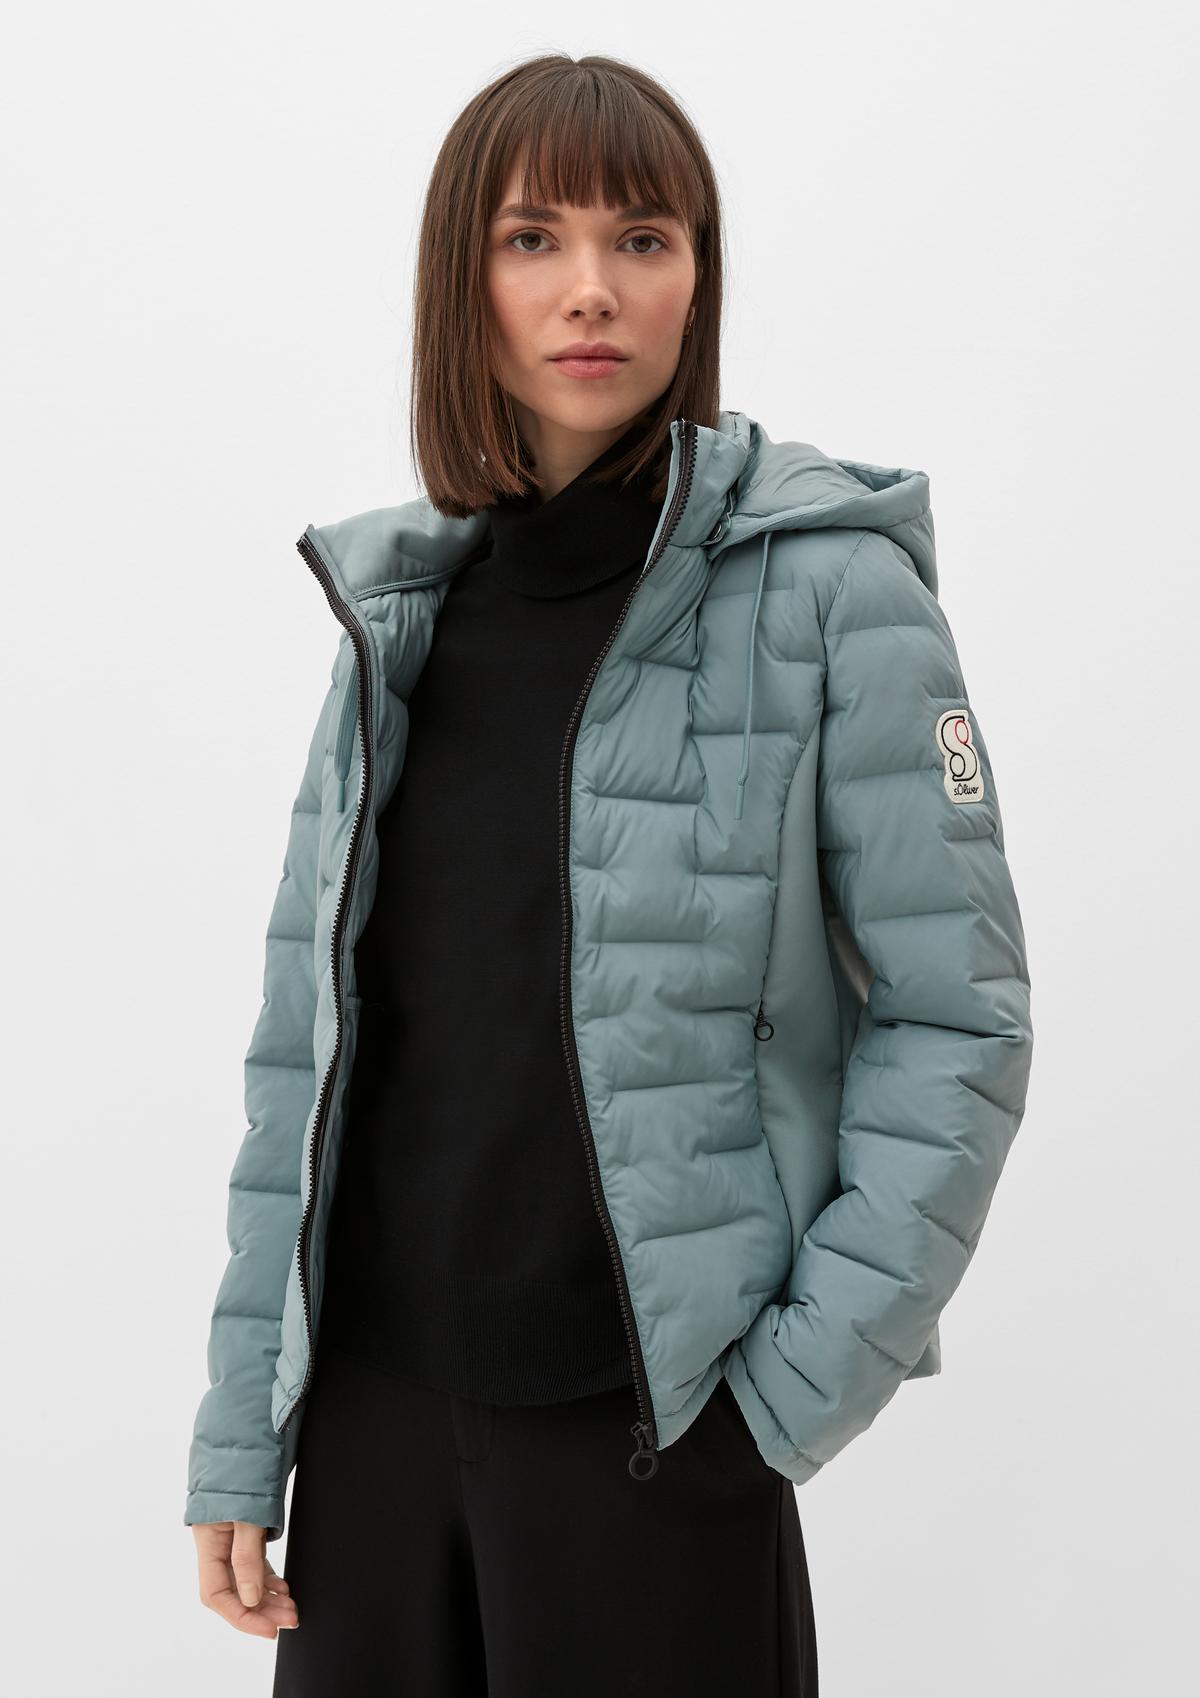 in - a of Padded jacket materials offwhite outdoor mix